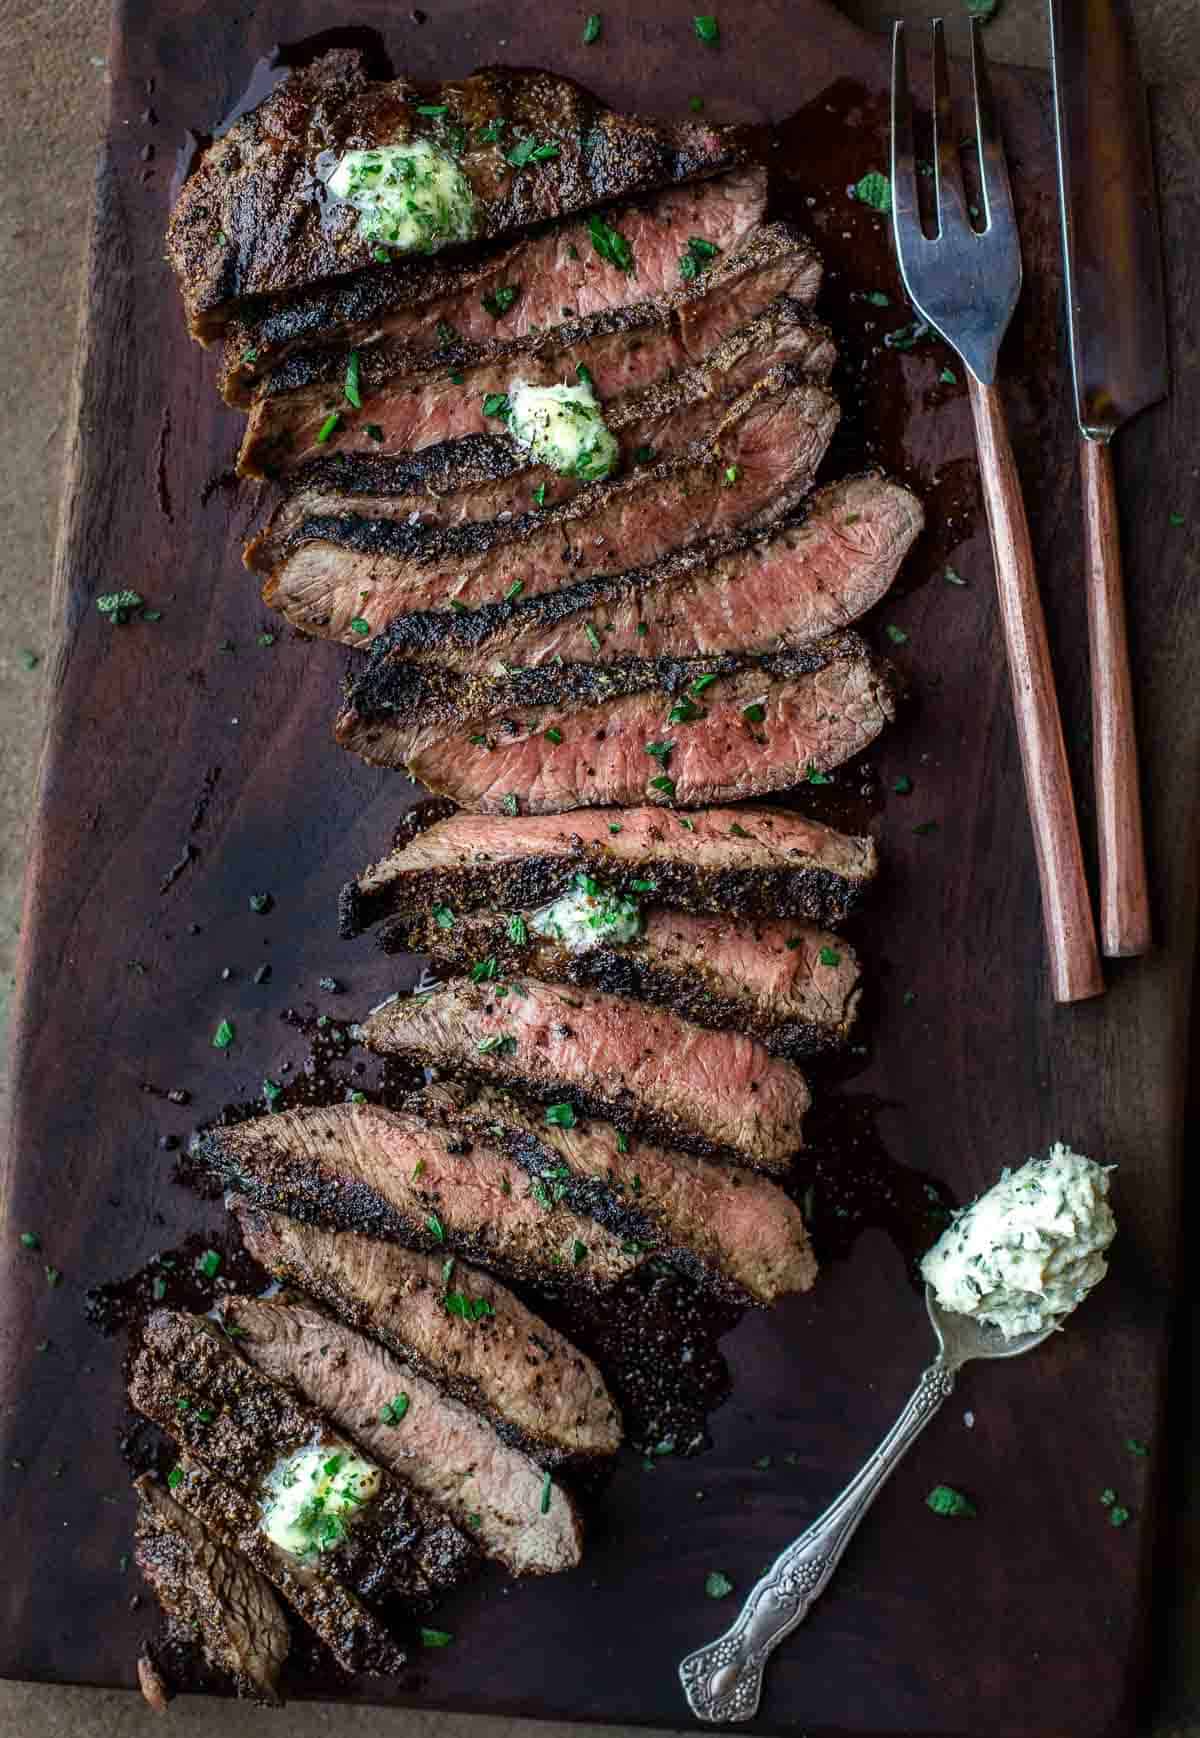 A grilled flat iron steak topped with compound butter on a cutting board